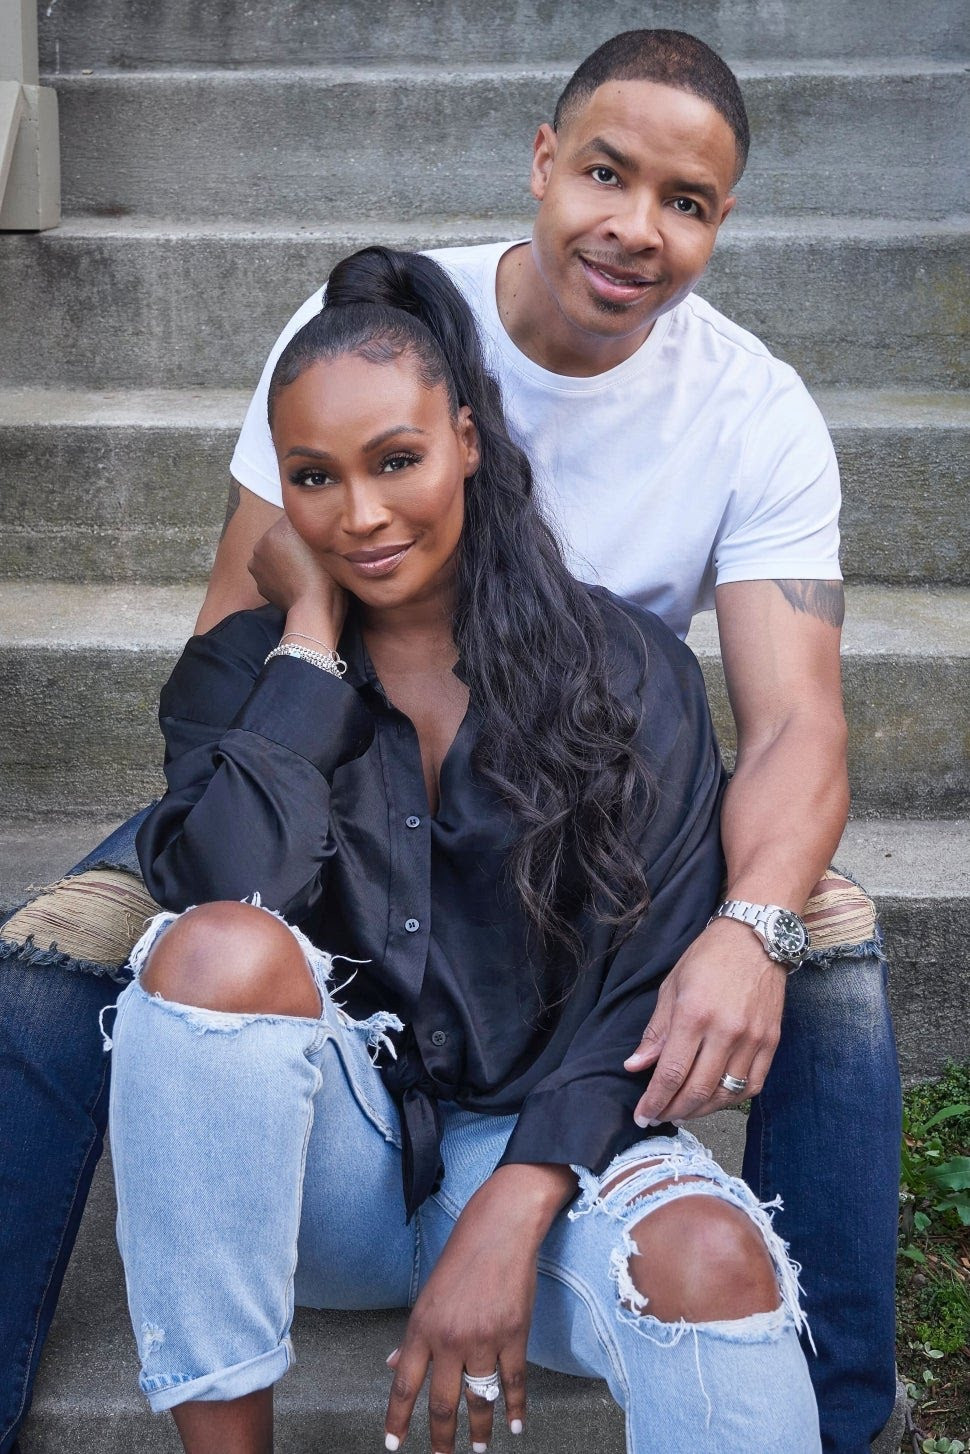 RHOA star Cynthia Bailey and TV host Mike Hill confirm split after two years of marriage